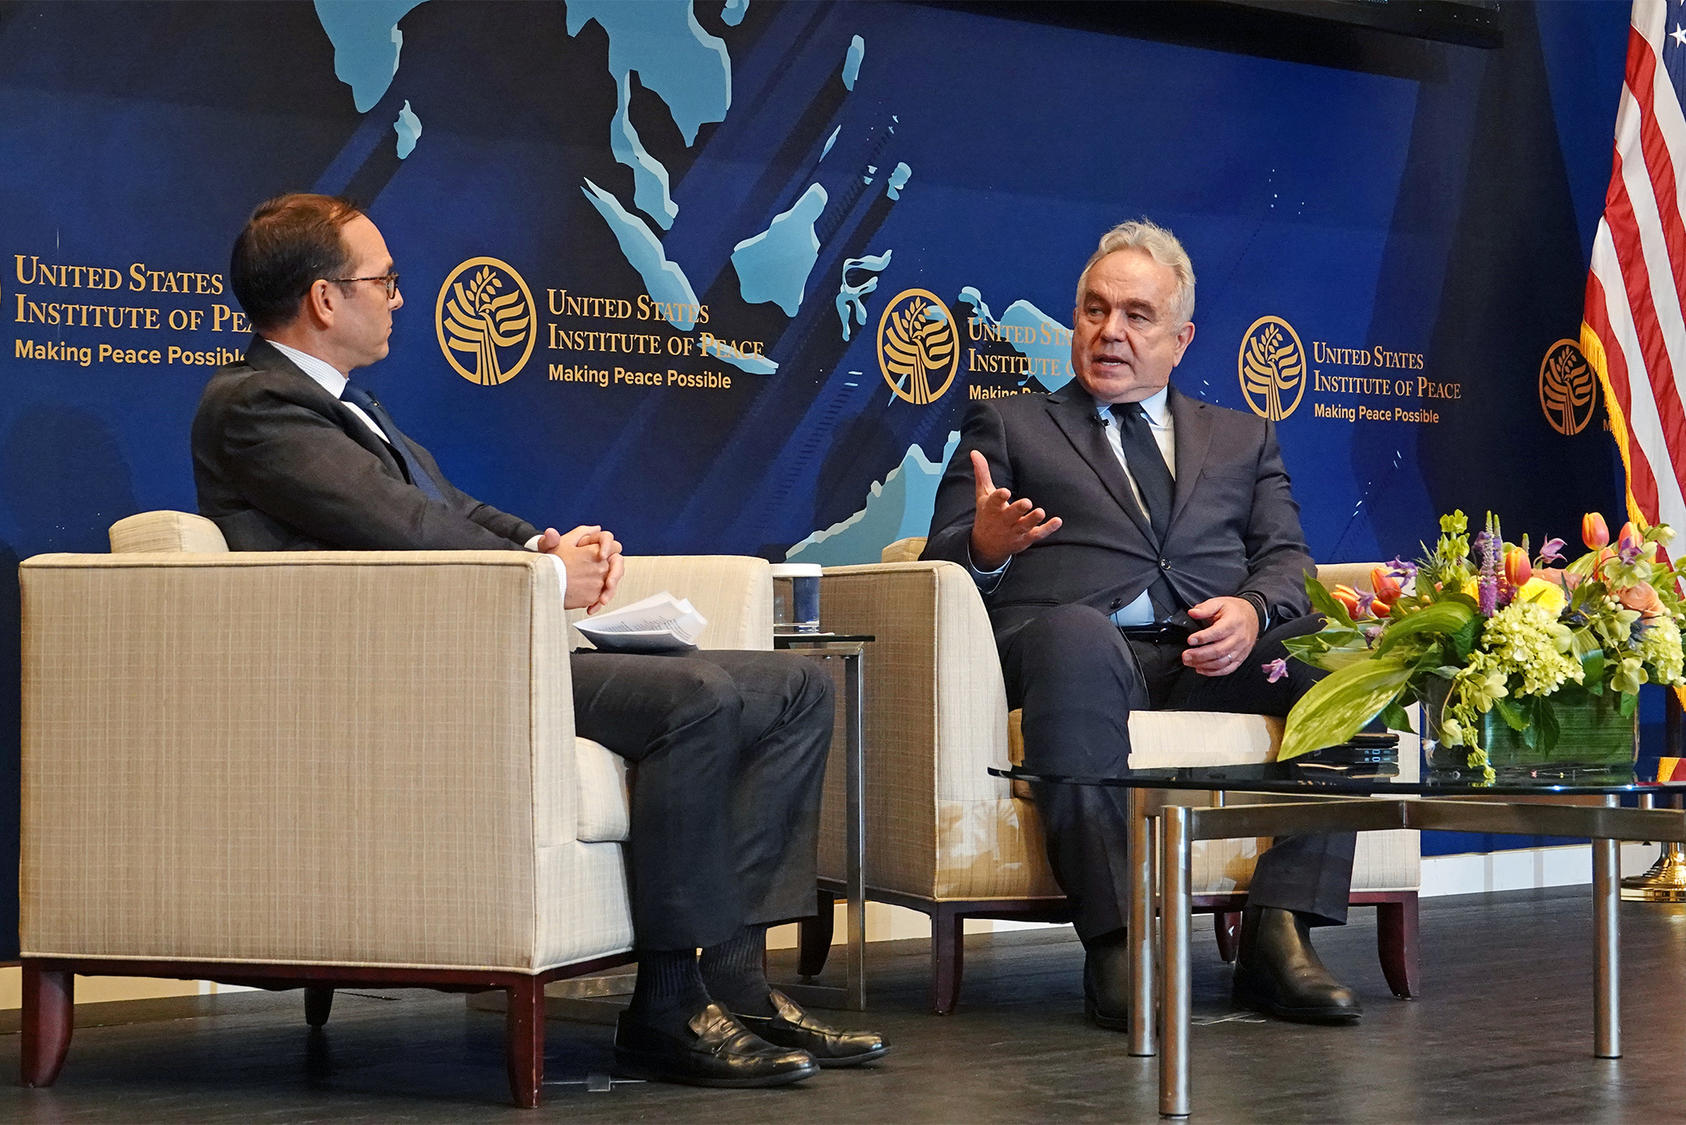 White House Indo-Pacific Coordinator Kurt Campbell (right) explains to USIP Special Advisor Evan Medeiros (left) why ASEAN is central to U.S. strategy in the Indo-Pacific.